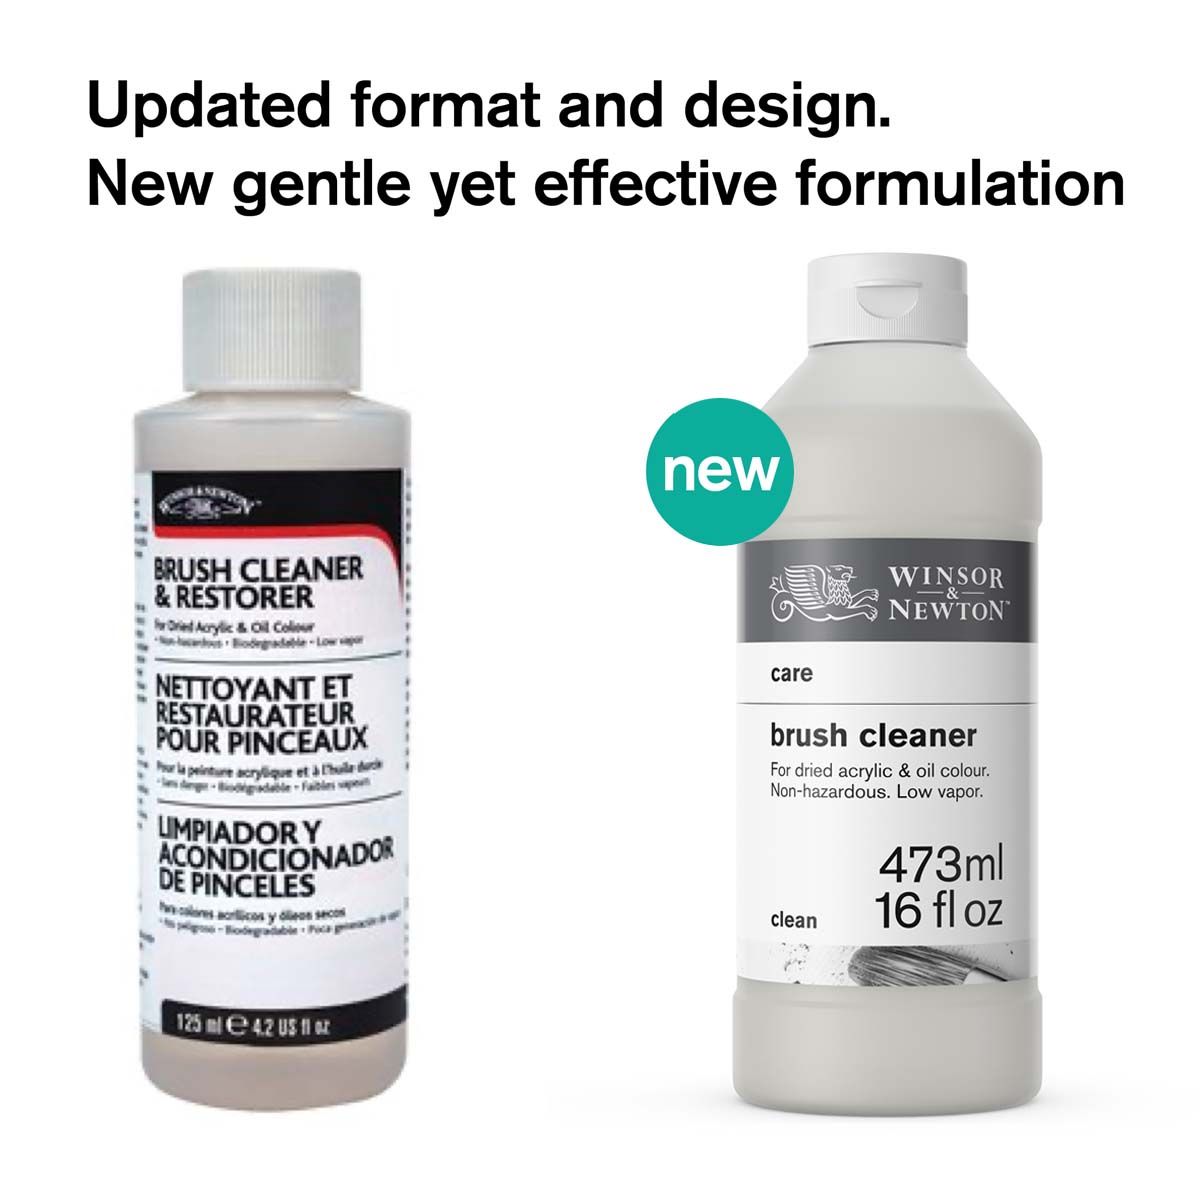 New packaging and new effective formula